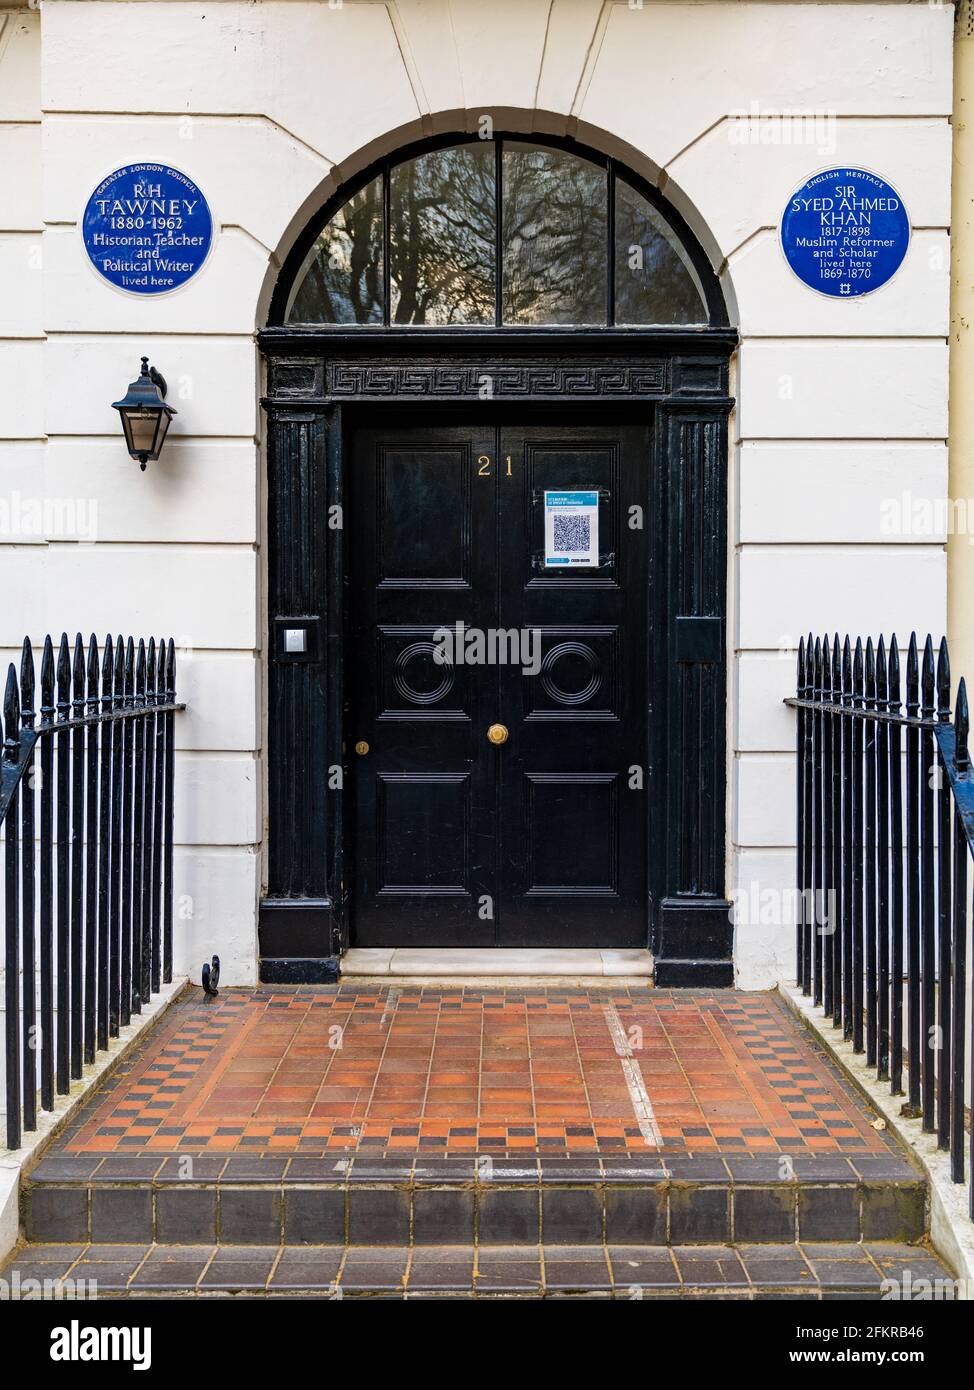 R H Tawney and Sir Syed Ahmed Khan Blue Plaques at 21 Mecklenburgh Square, Bloomsbury, London. Stock Photo